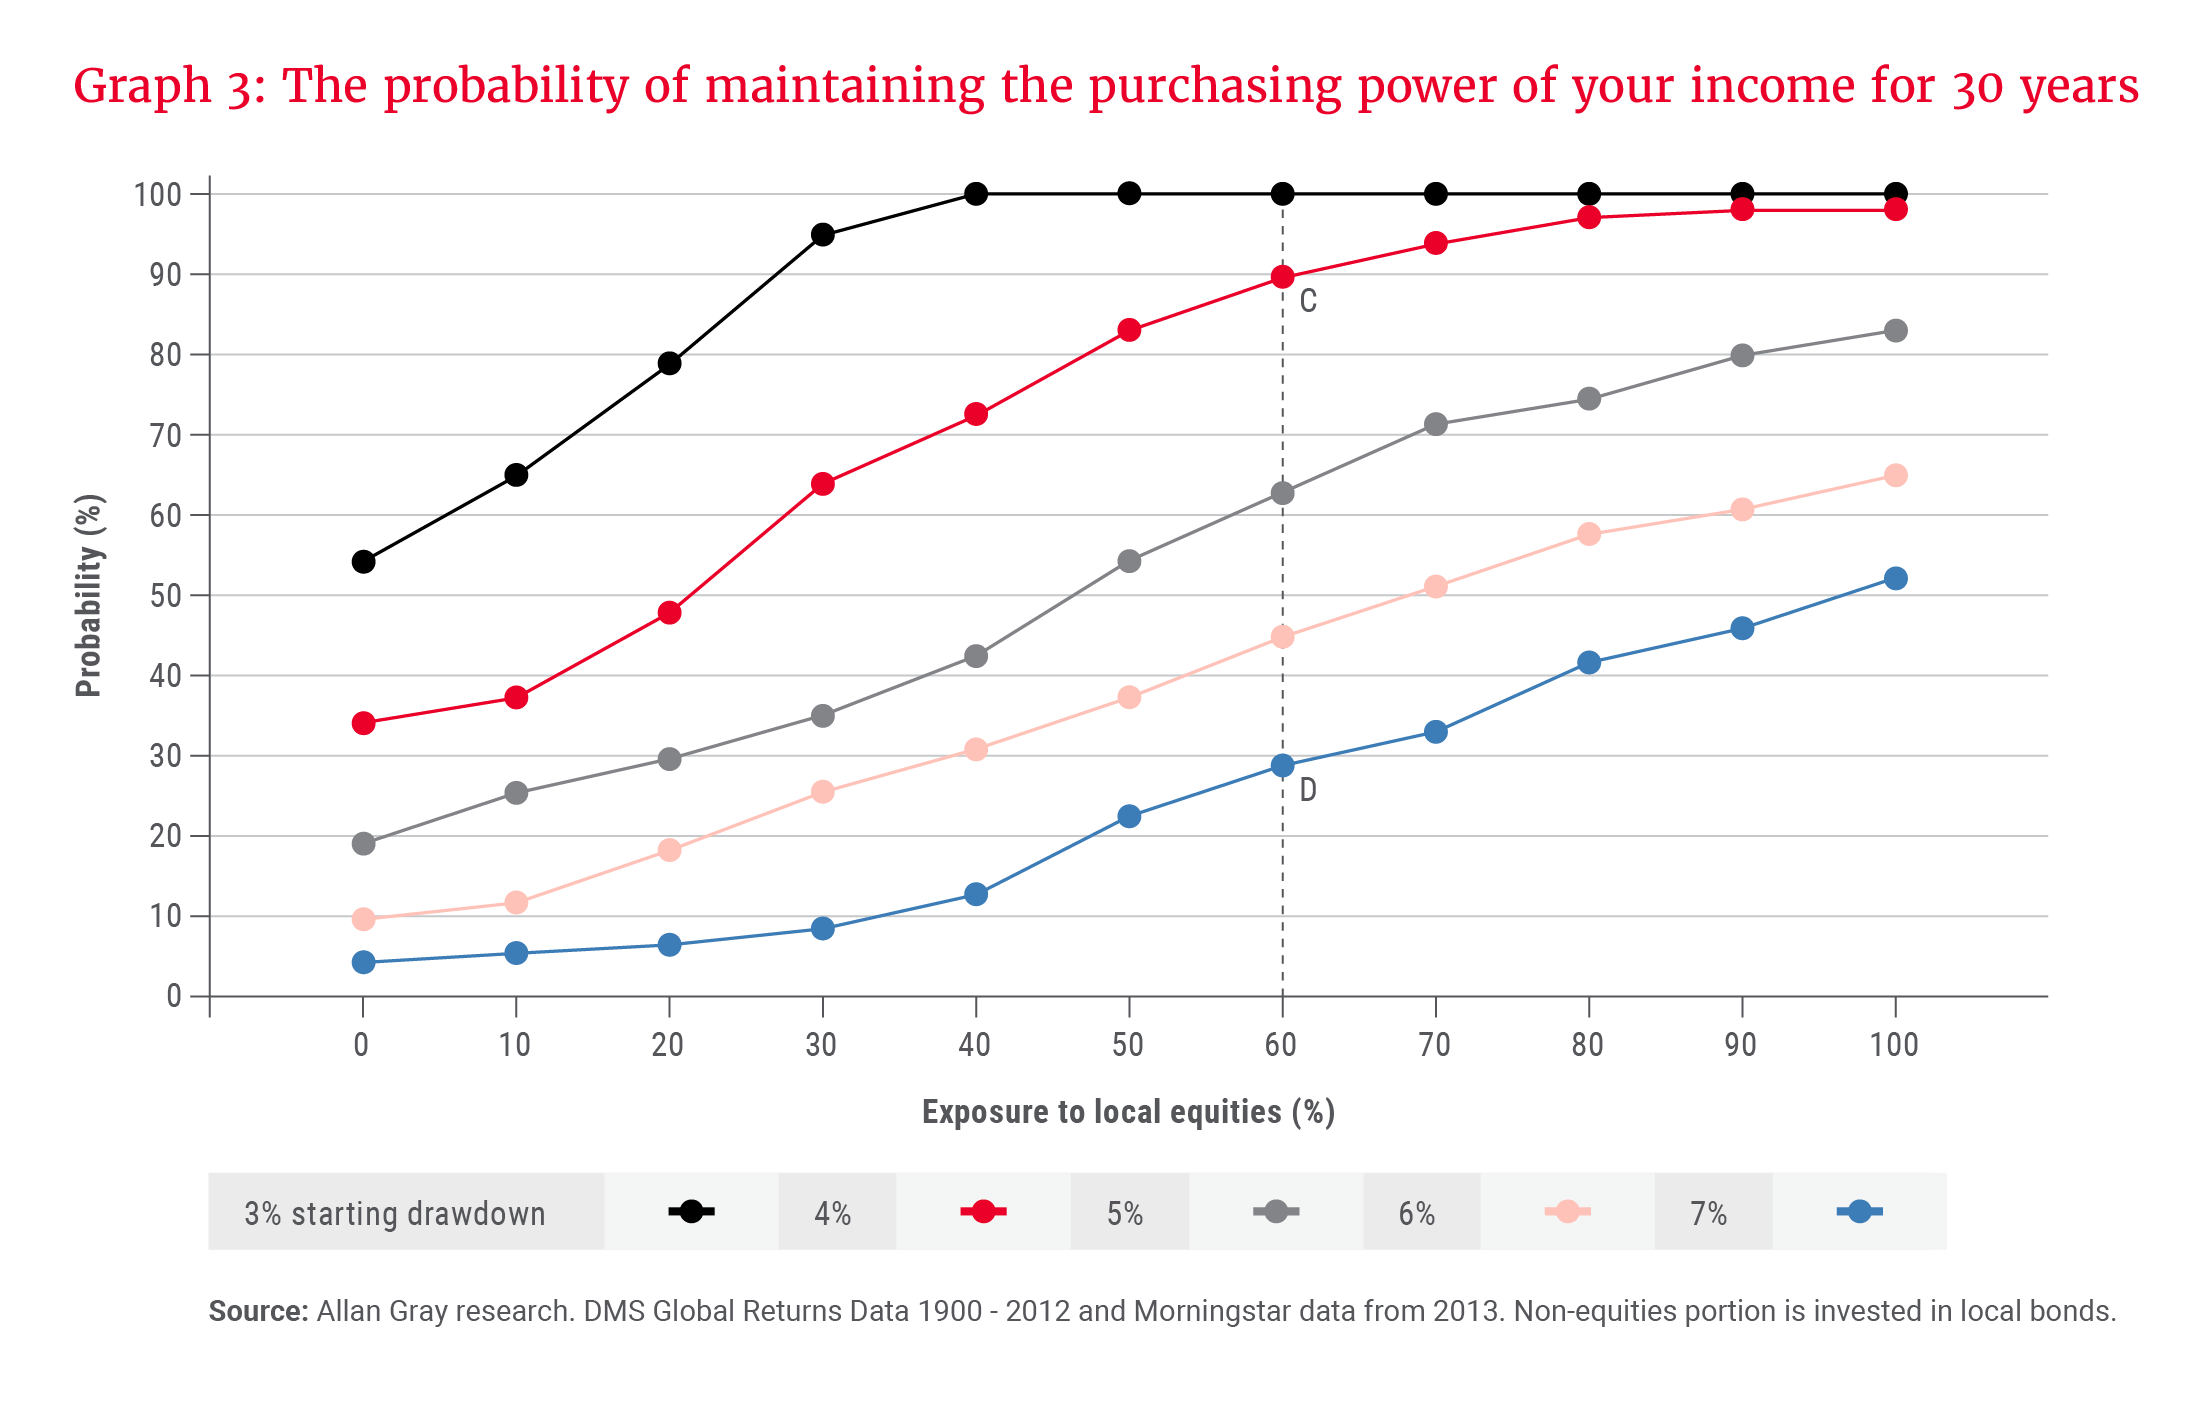 The probability of maintaining the purchasing power of income for 30 years